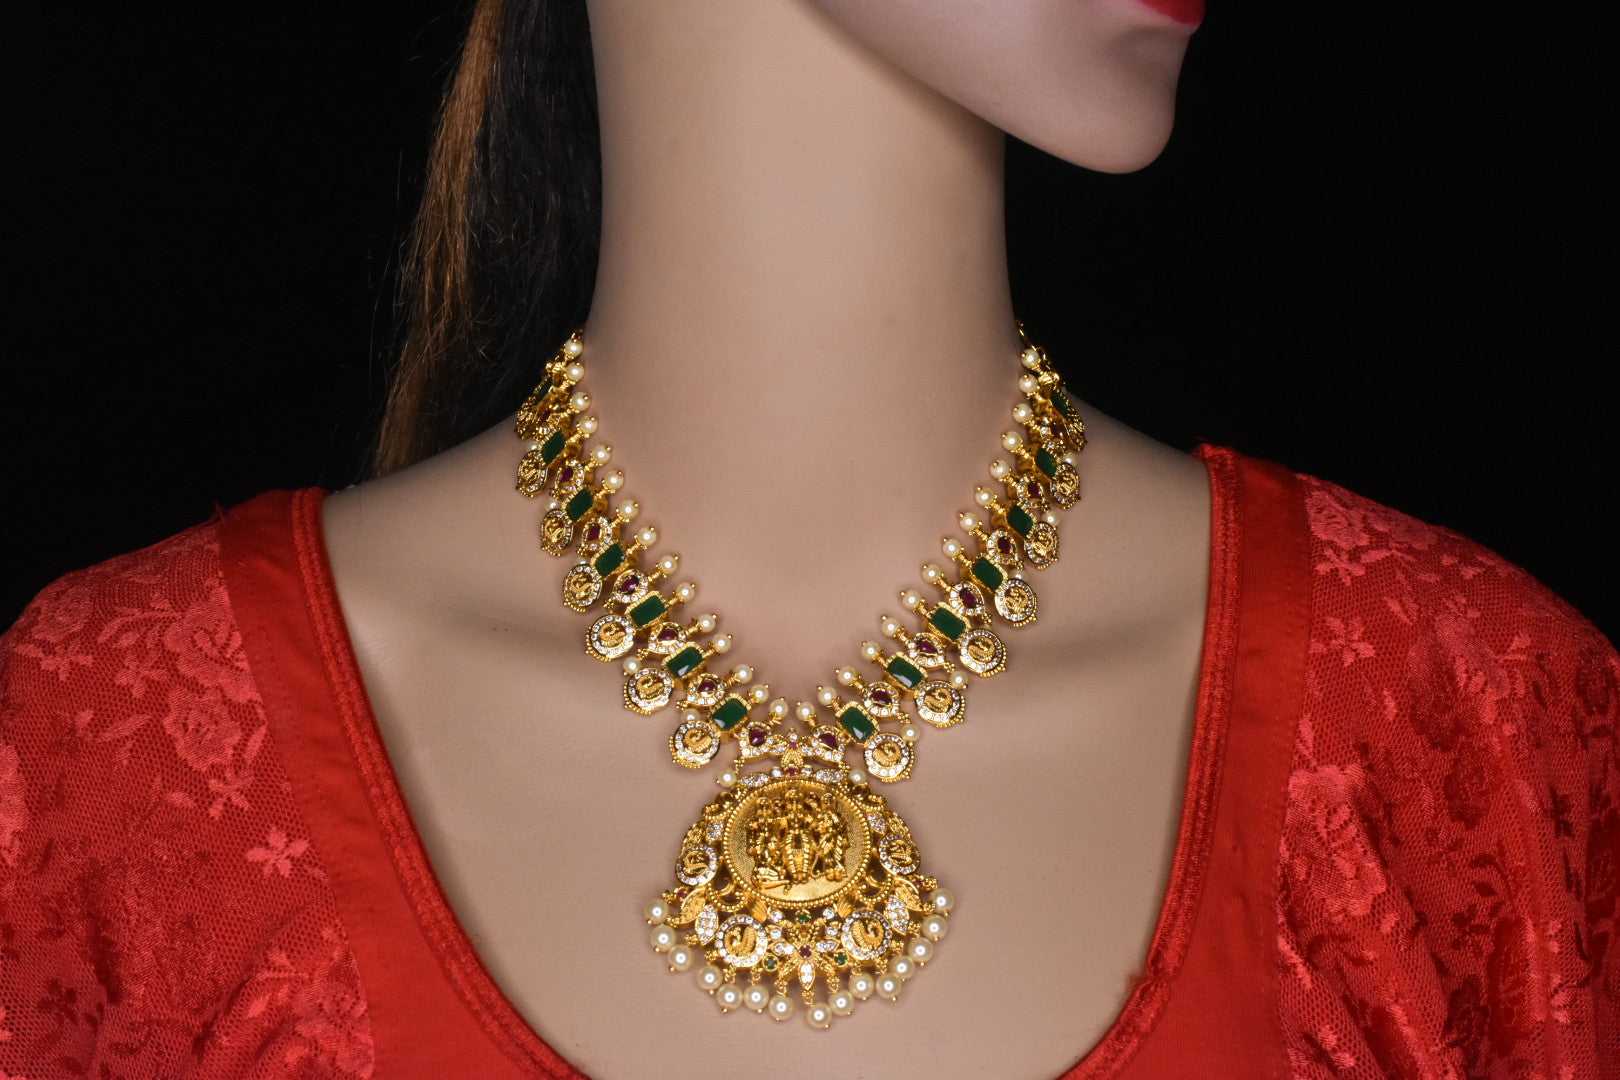 22K Gold 'Ram Parivar - Peacock' Necklace With Cz, Color Stones & Culture  Pearls (Temple Jewellery) - 235-GN4562 in 29.700 Grams